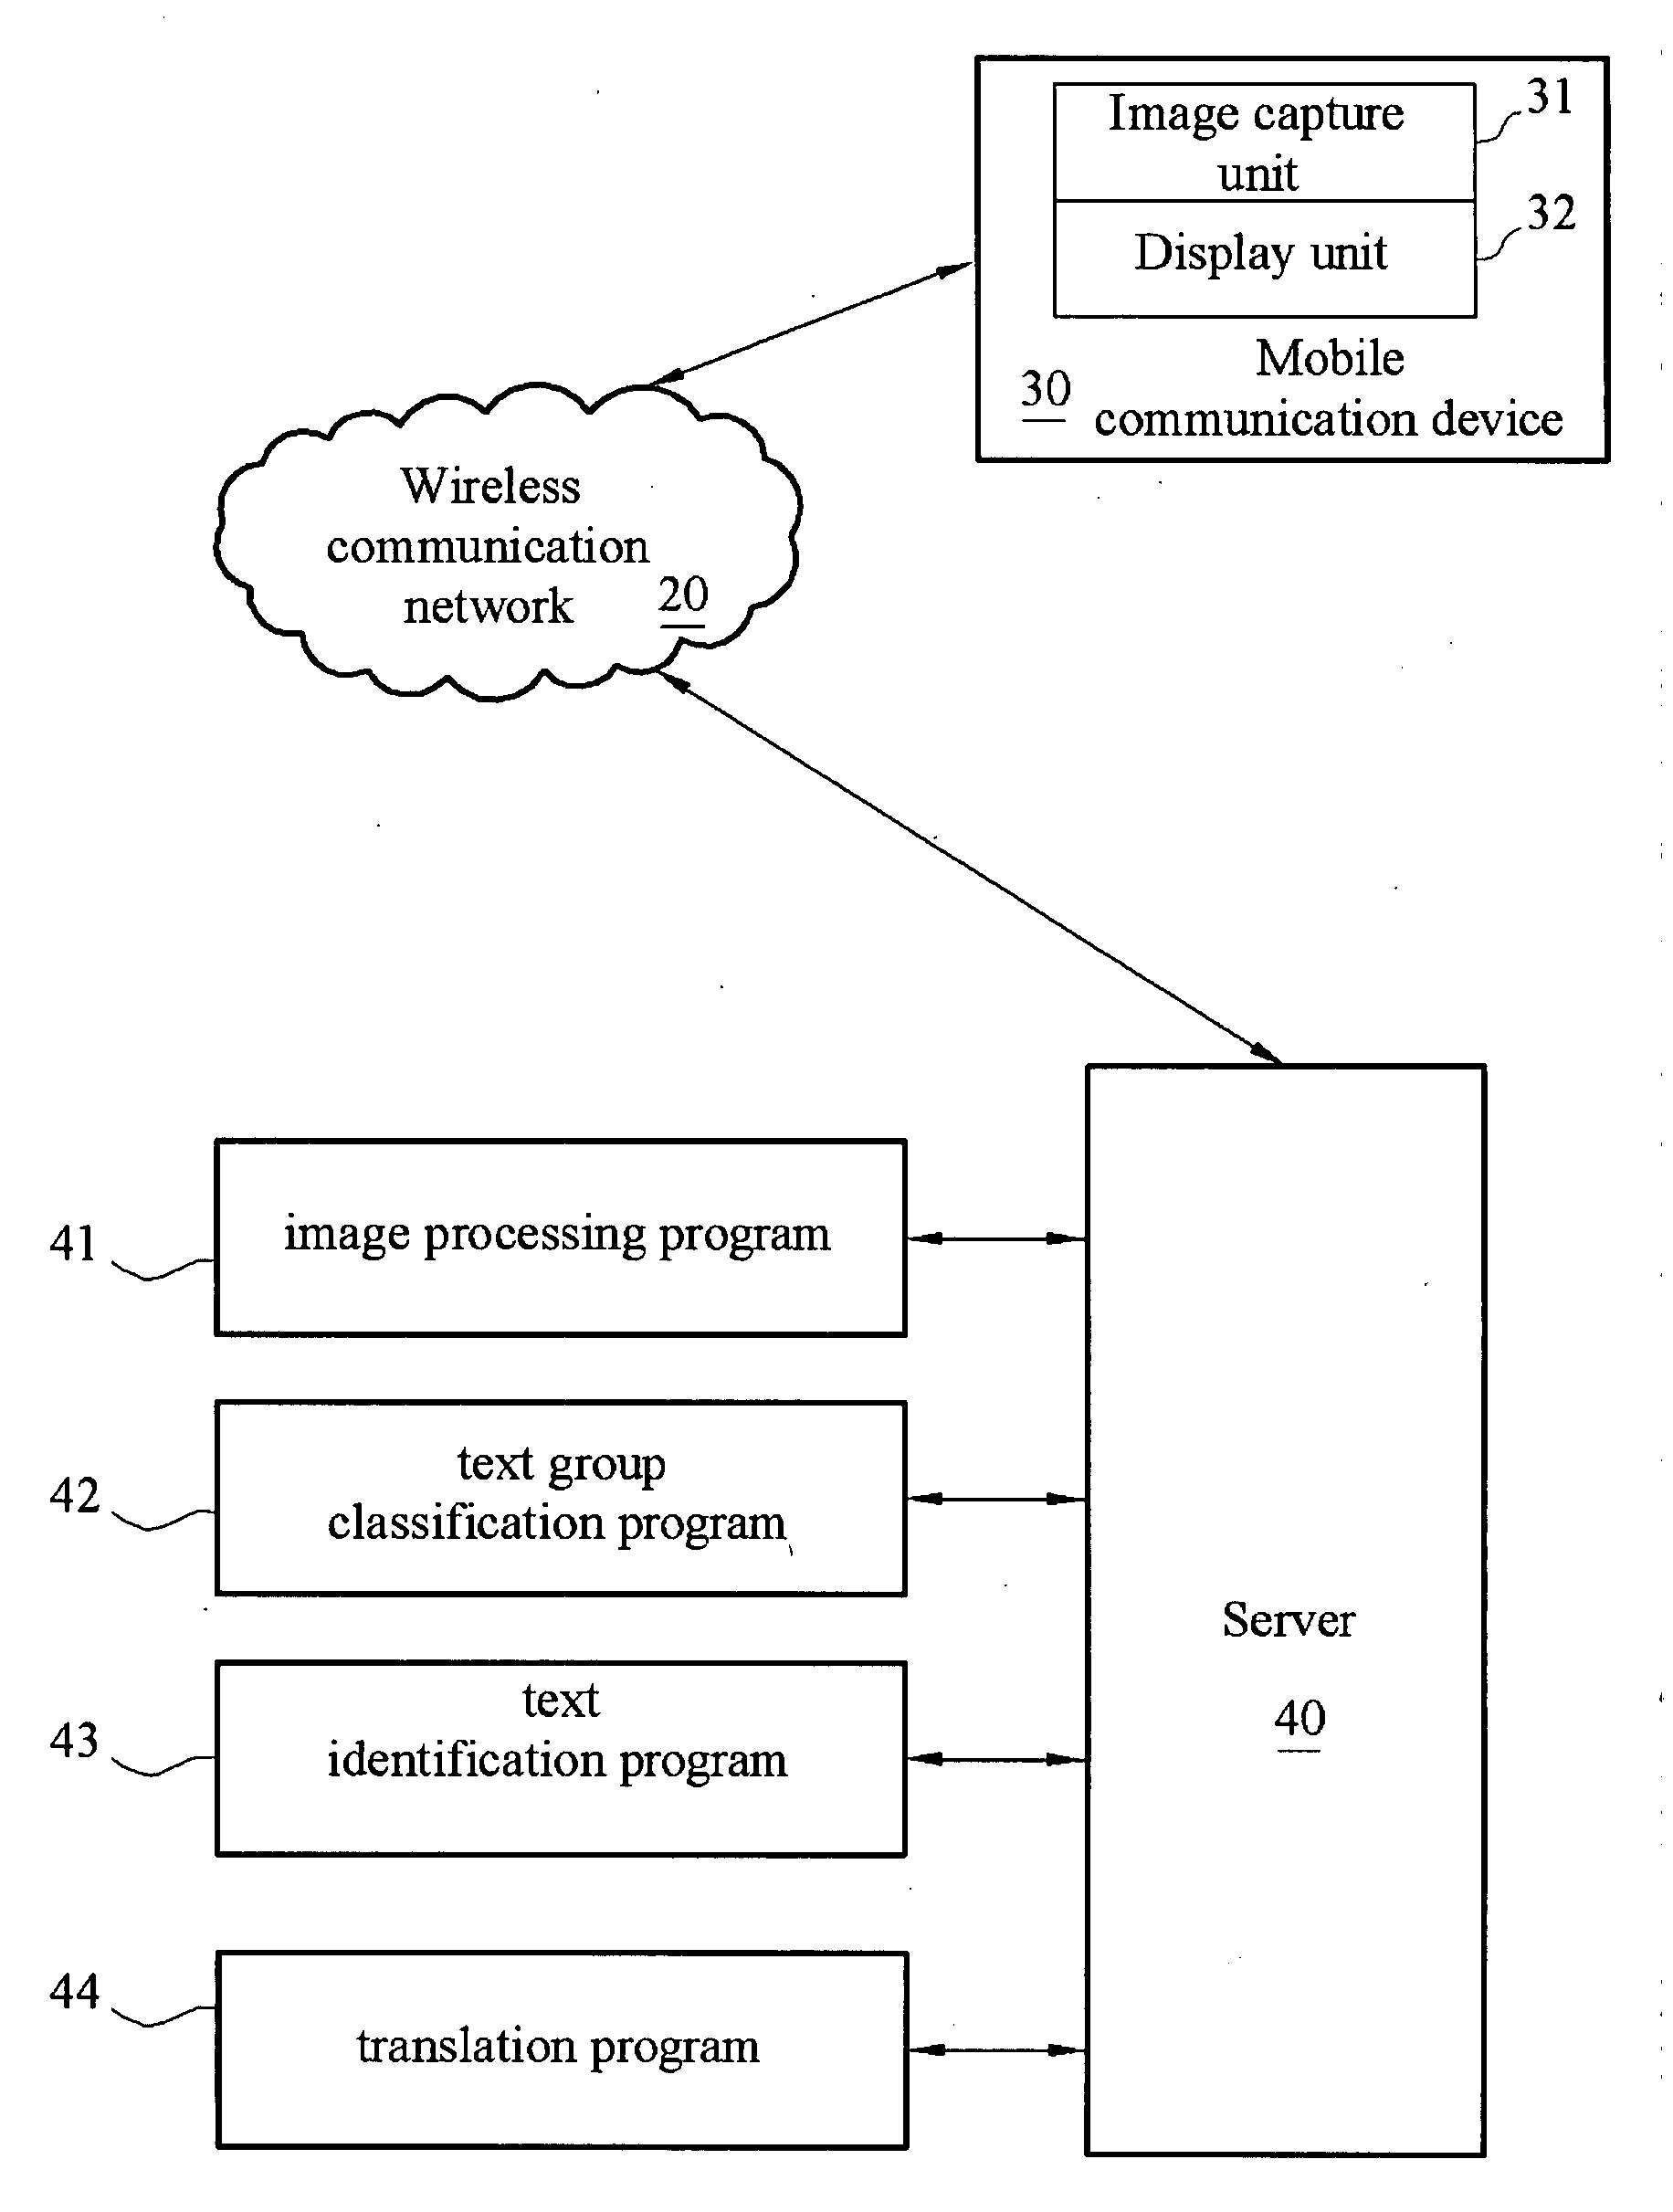 Method and system of using mobile communication apparatus for translating image text